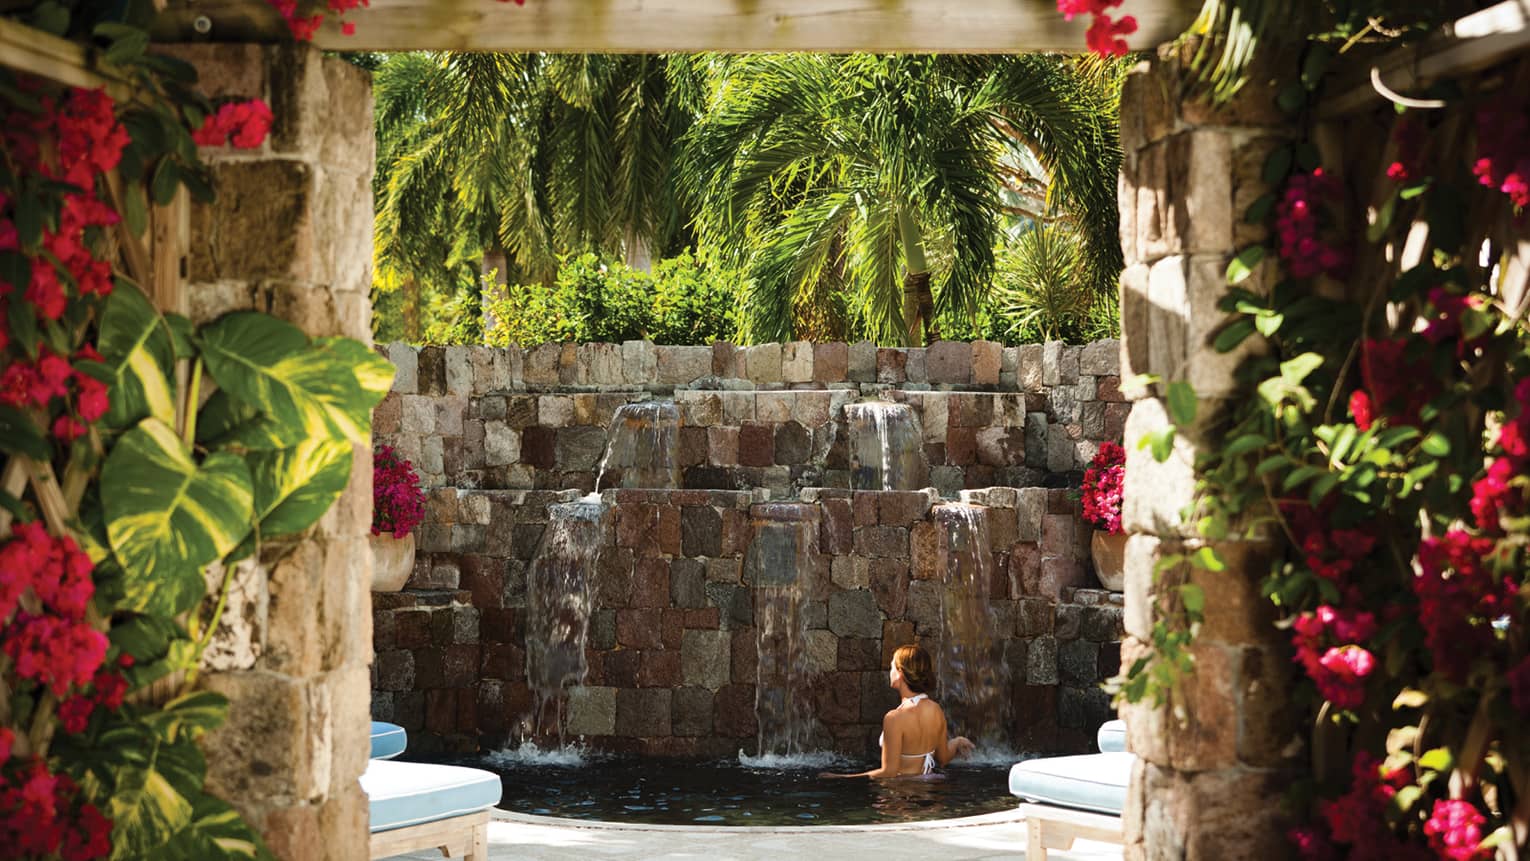 Woman bathes in small pool under stone fountain under palm trees, brick walls with pink flowers